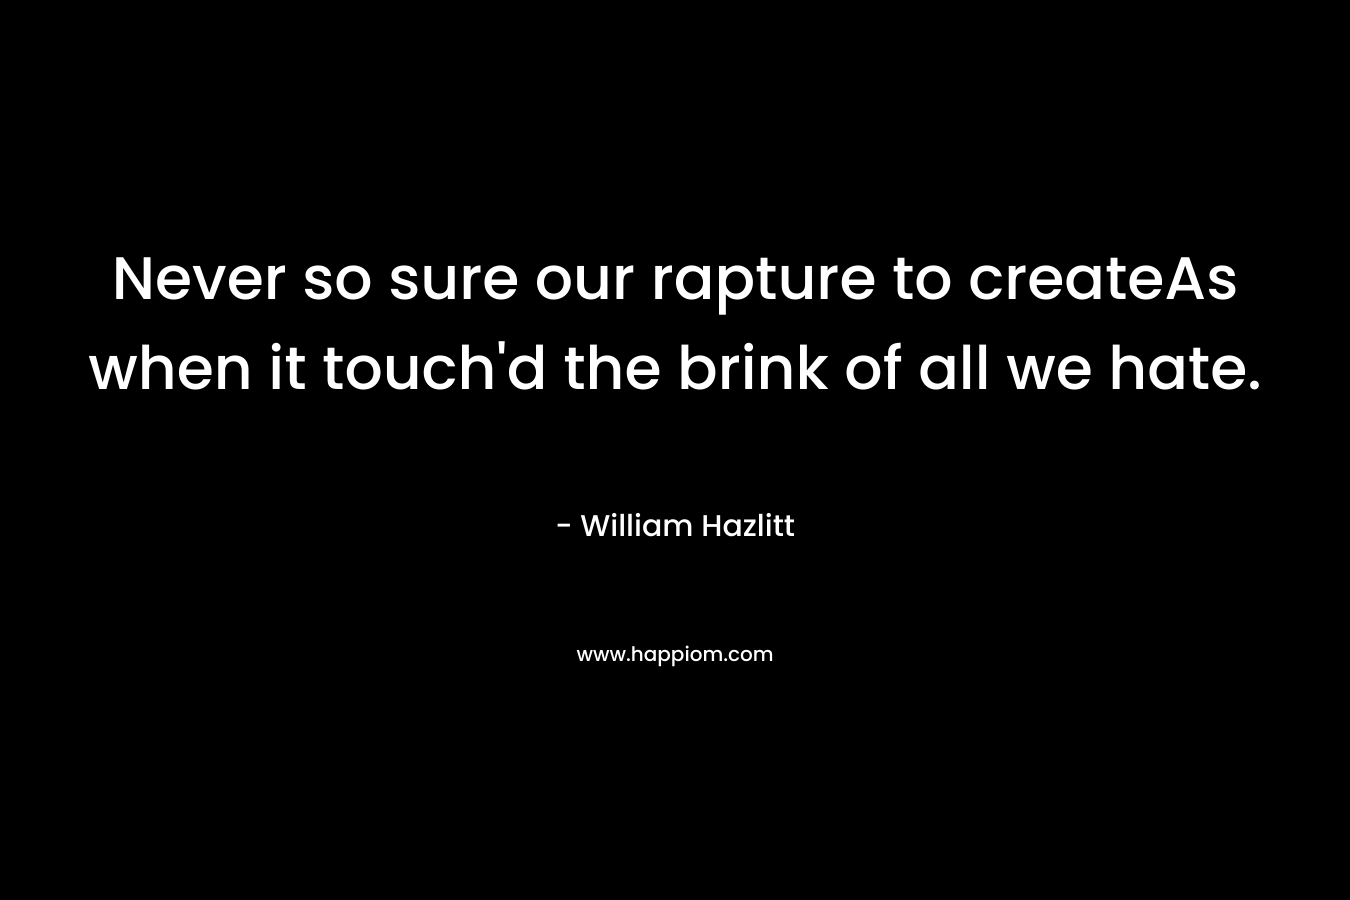 Never so sure our rapture to createAs when it touch’d the brink of all we hate. – William Hazlitt